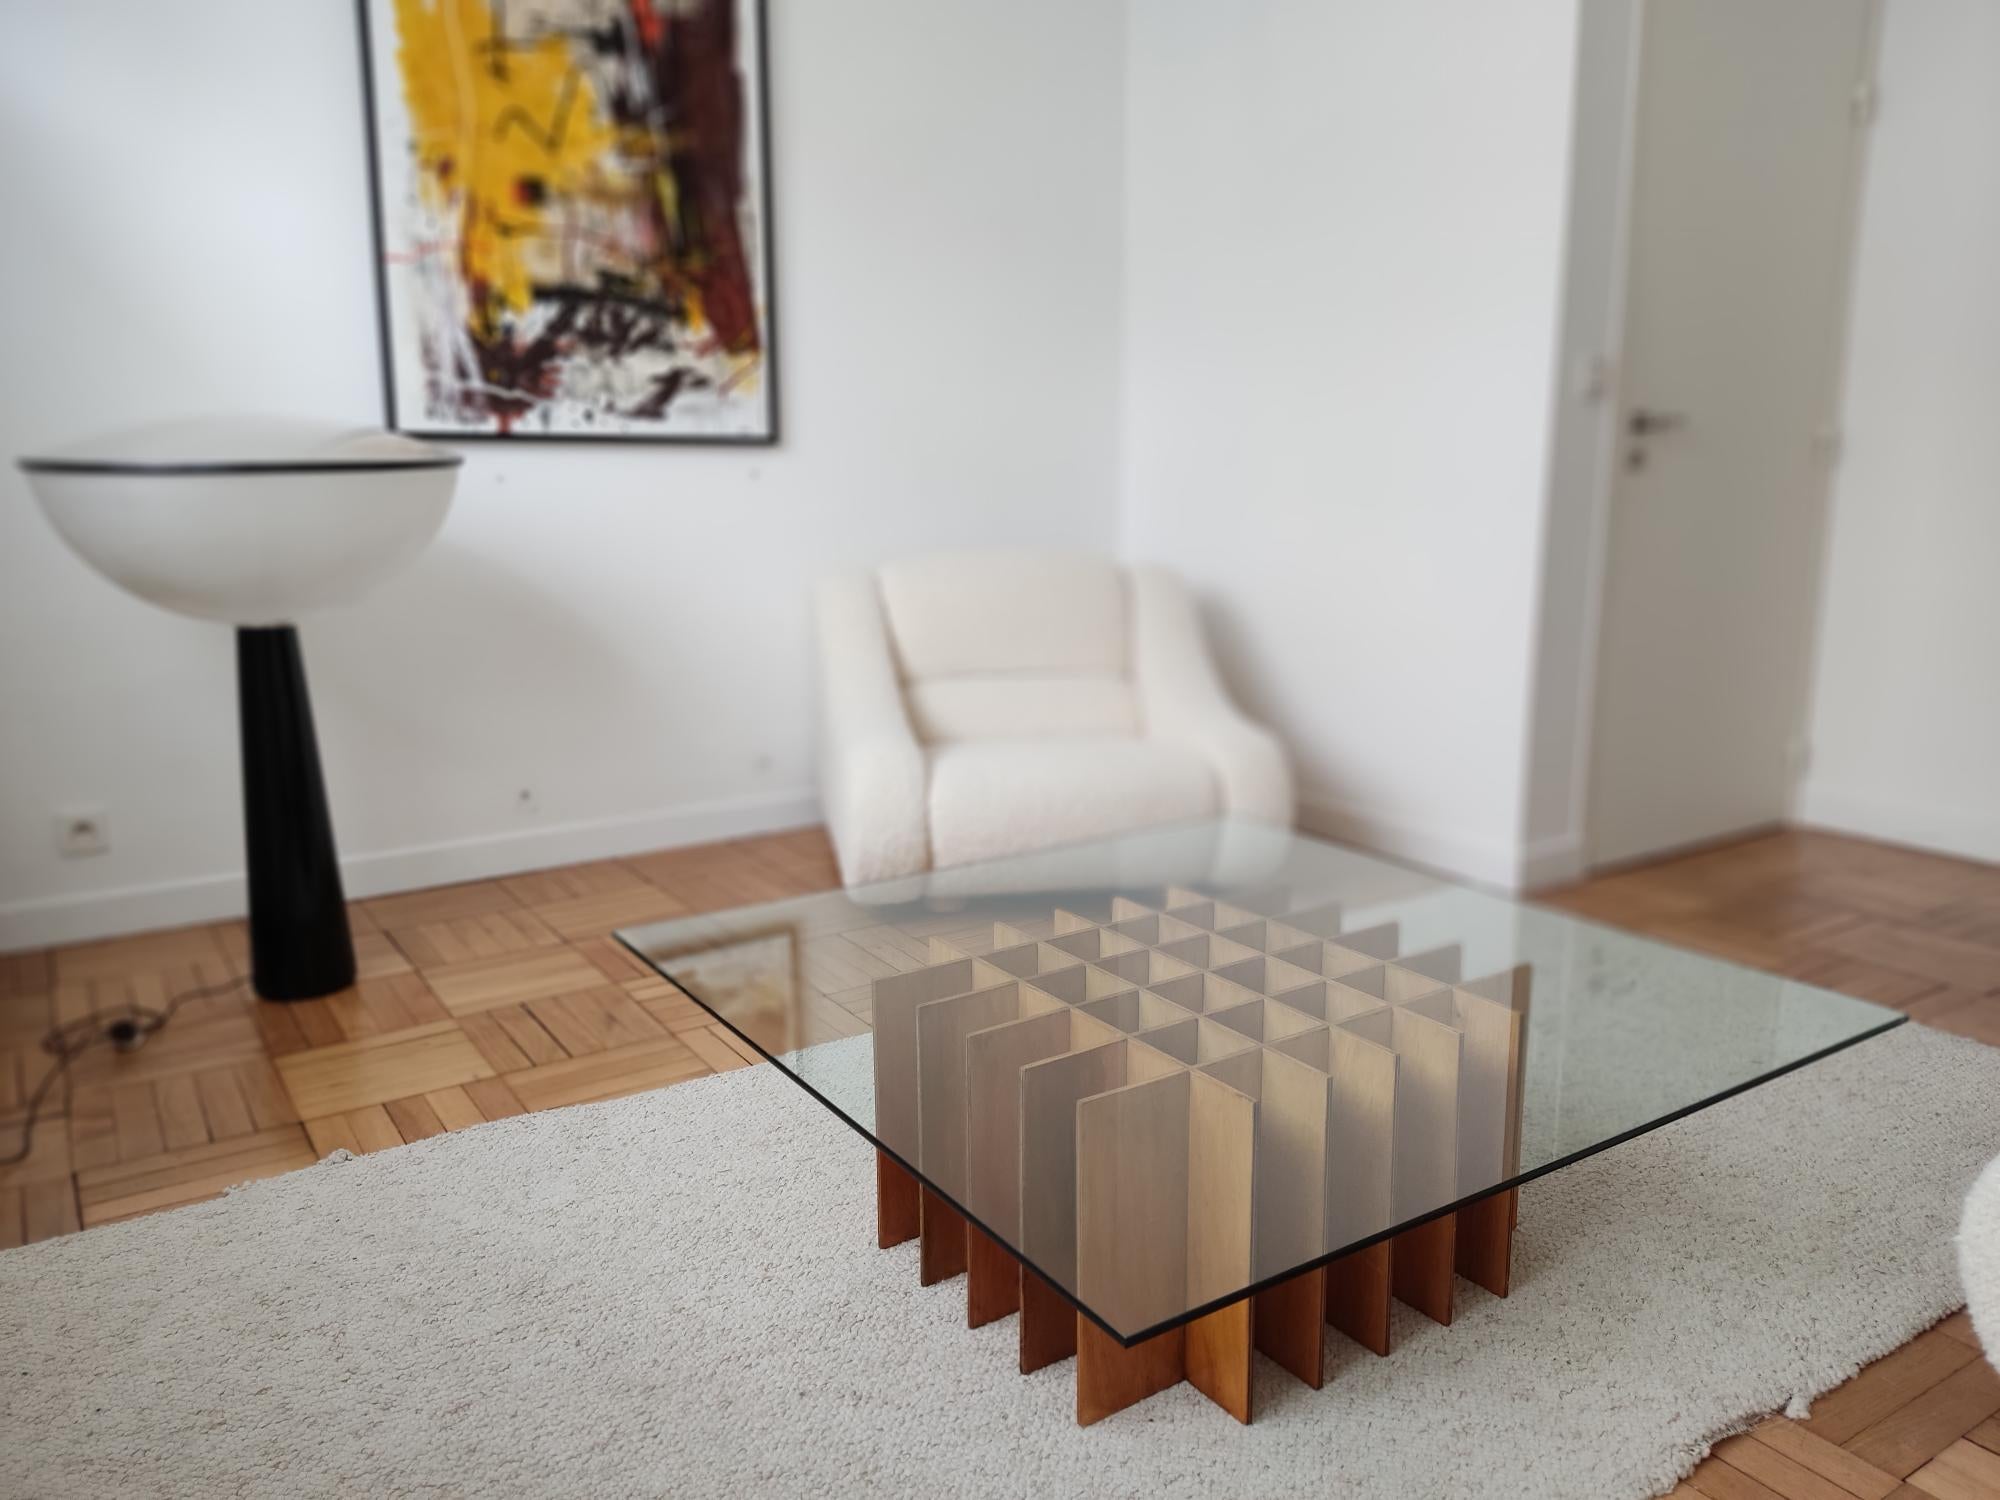 talian coffee table from the 1970s. Squared wooden leg on which rests a square glass top.
Handicraft work by unknown designer, slight traces of use consistent with age.